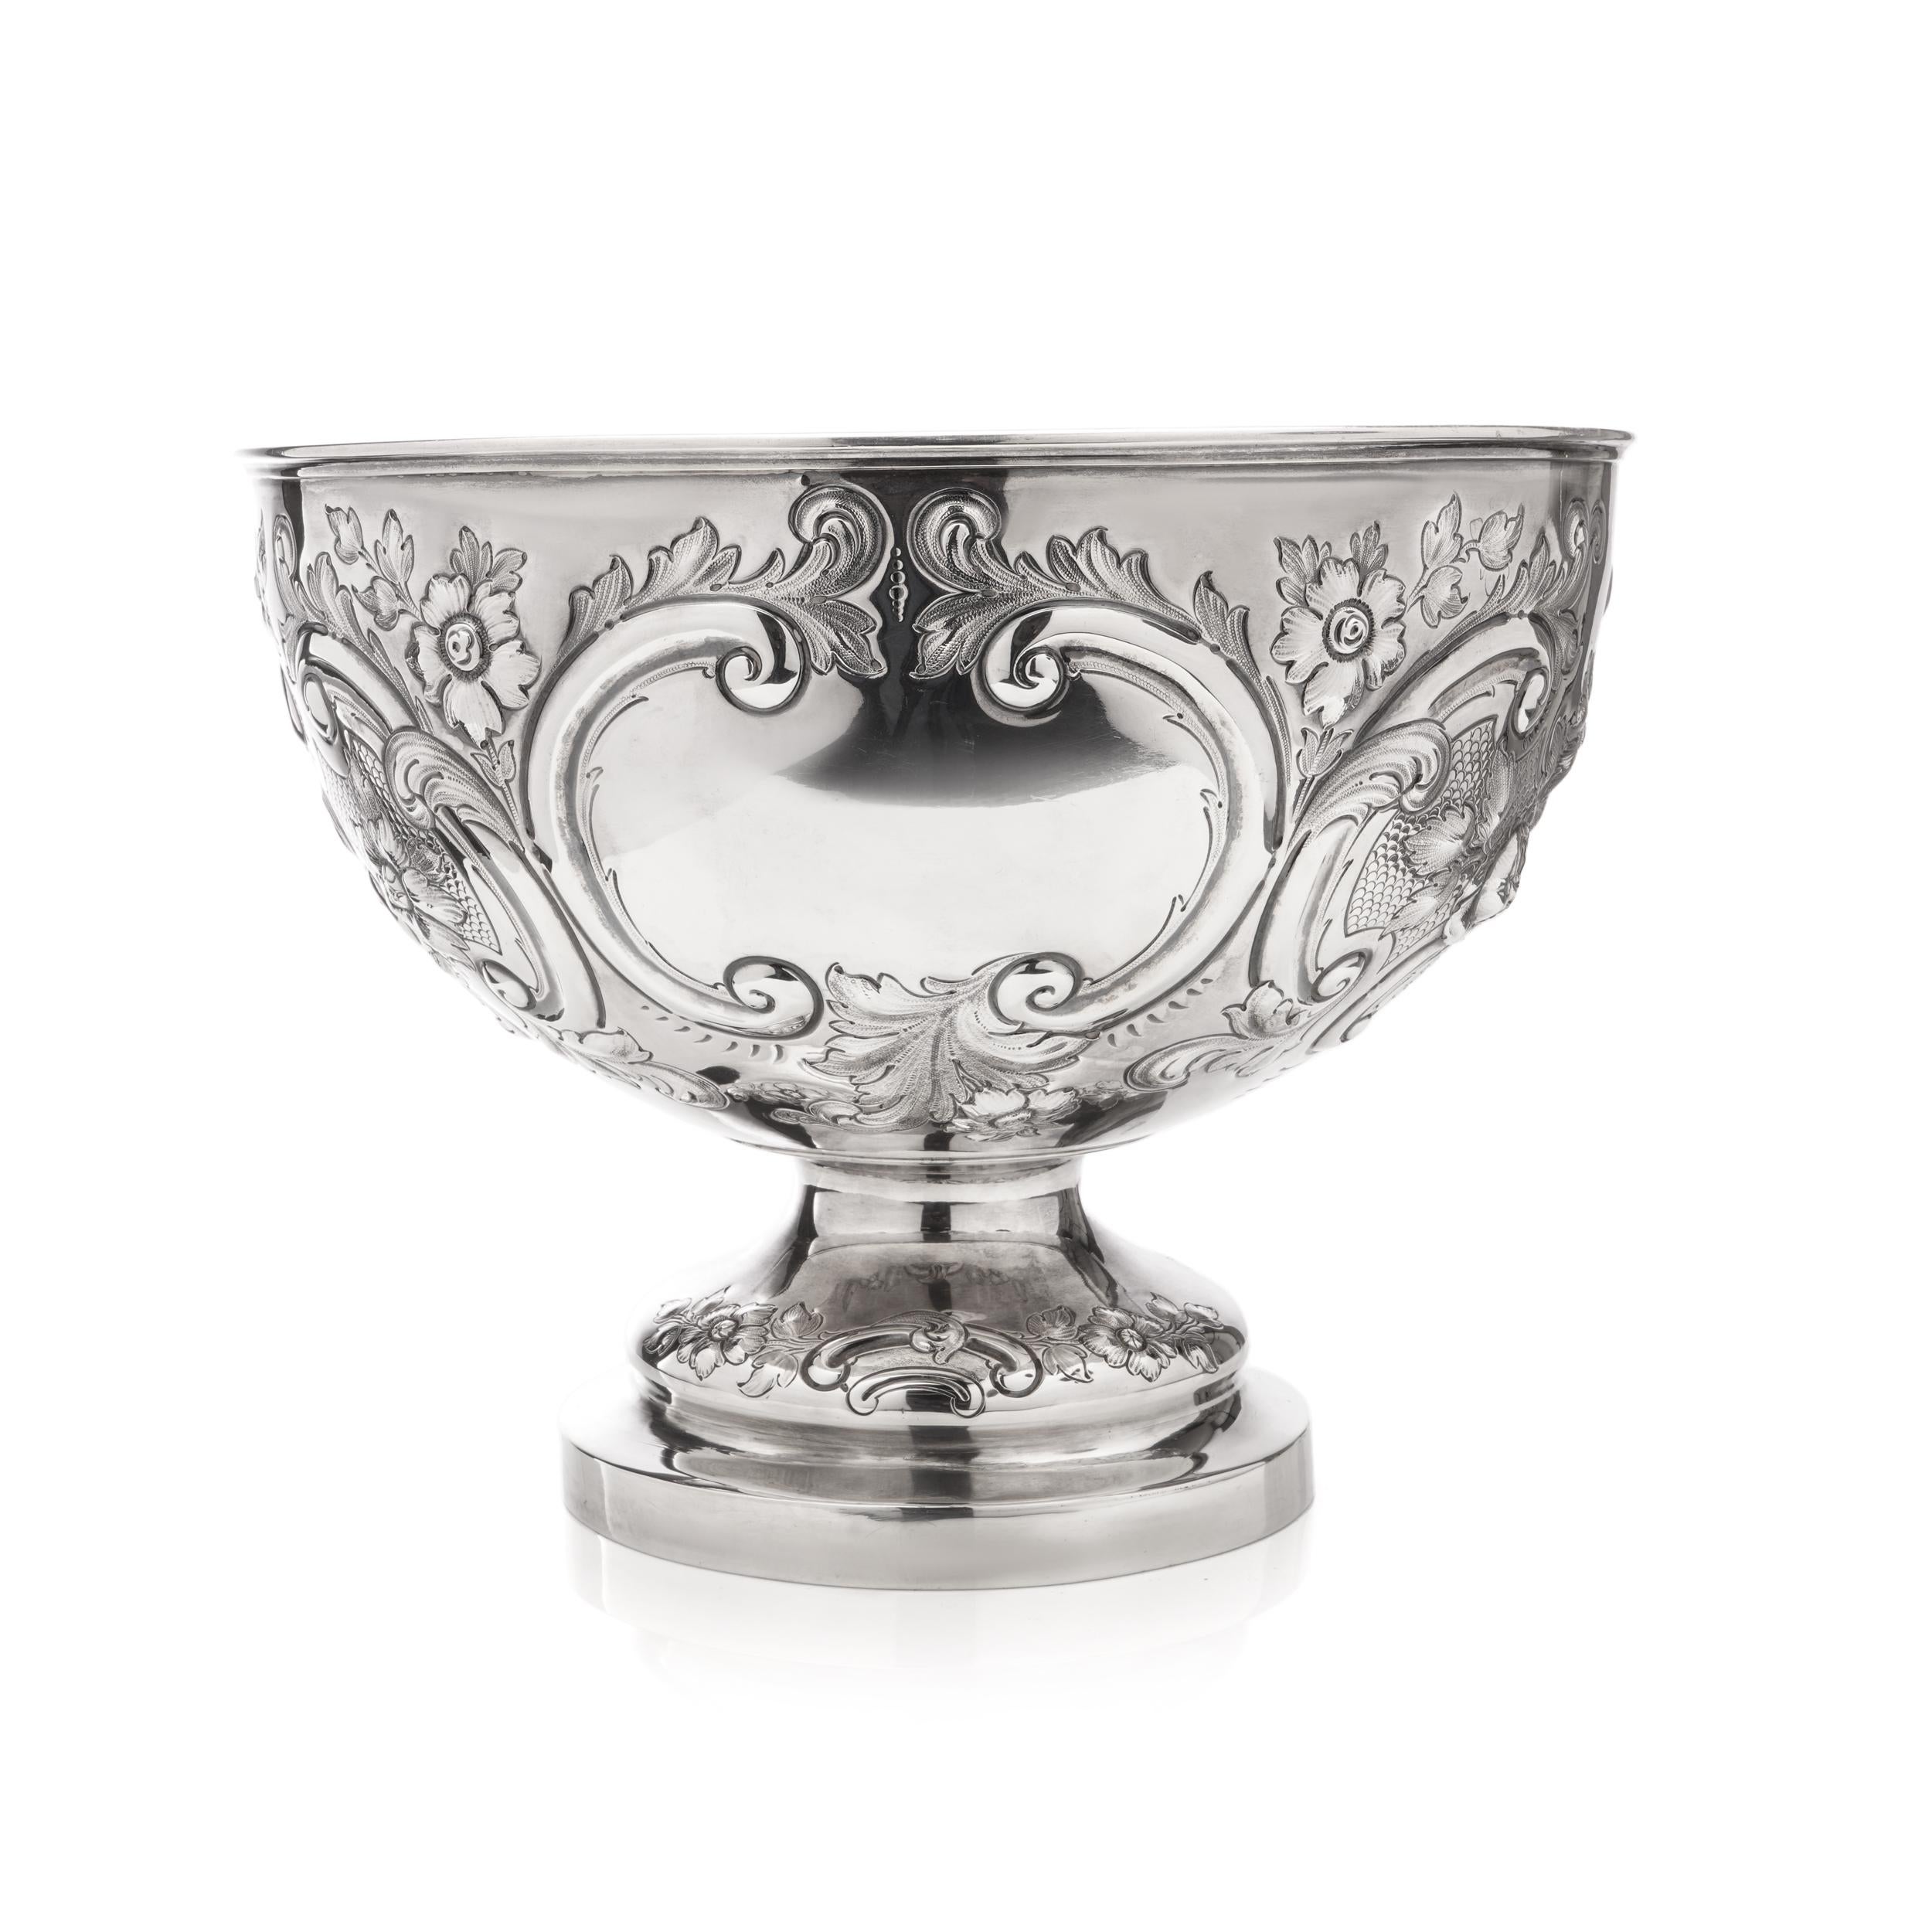 Antique Victorian sterling 925 silver embossed large punch bowl/wine cooler. 
Cooler is embossed with scrolls, acanthus leaves and floral motifs.

Please note: cooler has a commemorative inscription ' Presented to Miss J.Hanbury Williams By Crawshay